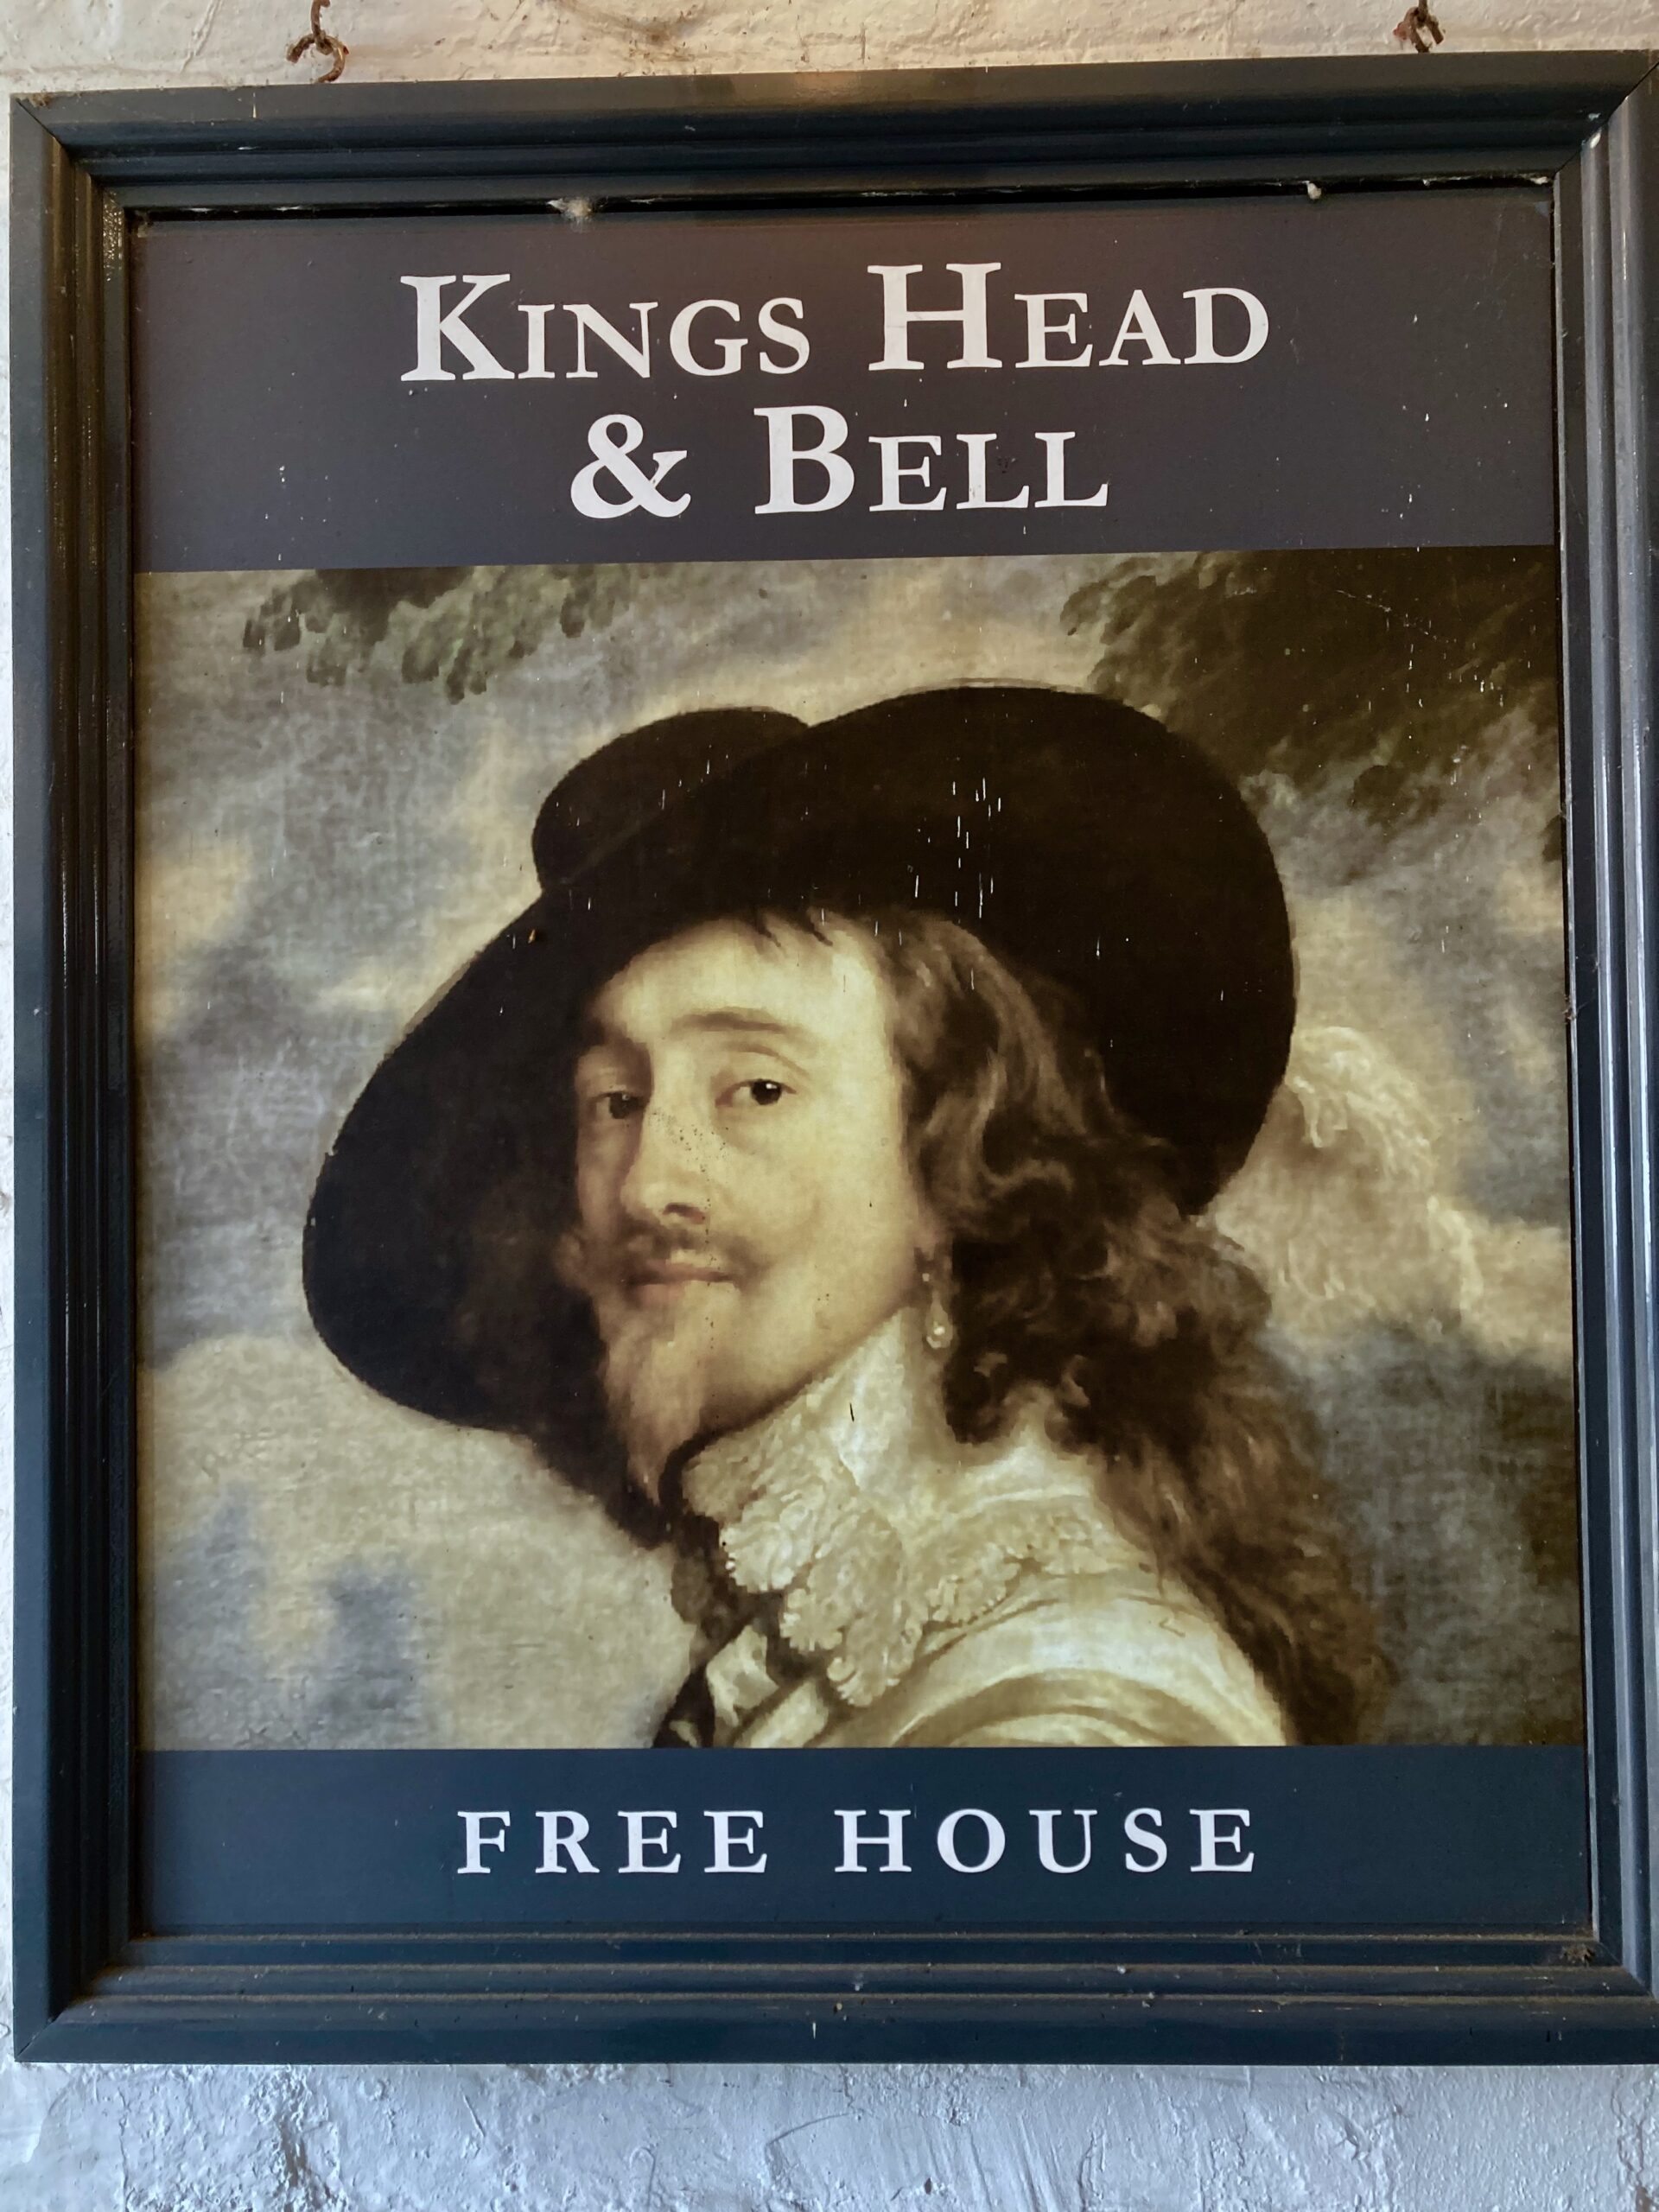 Sign for the King's Head and Bell, with a portrait of King Charles I